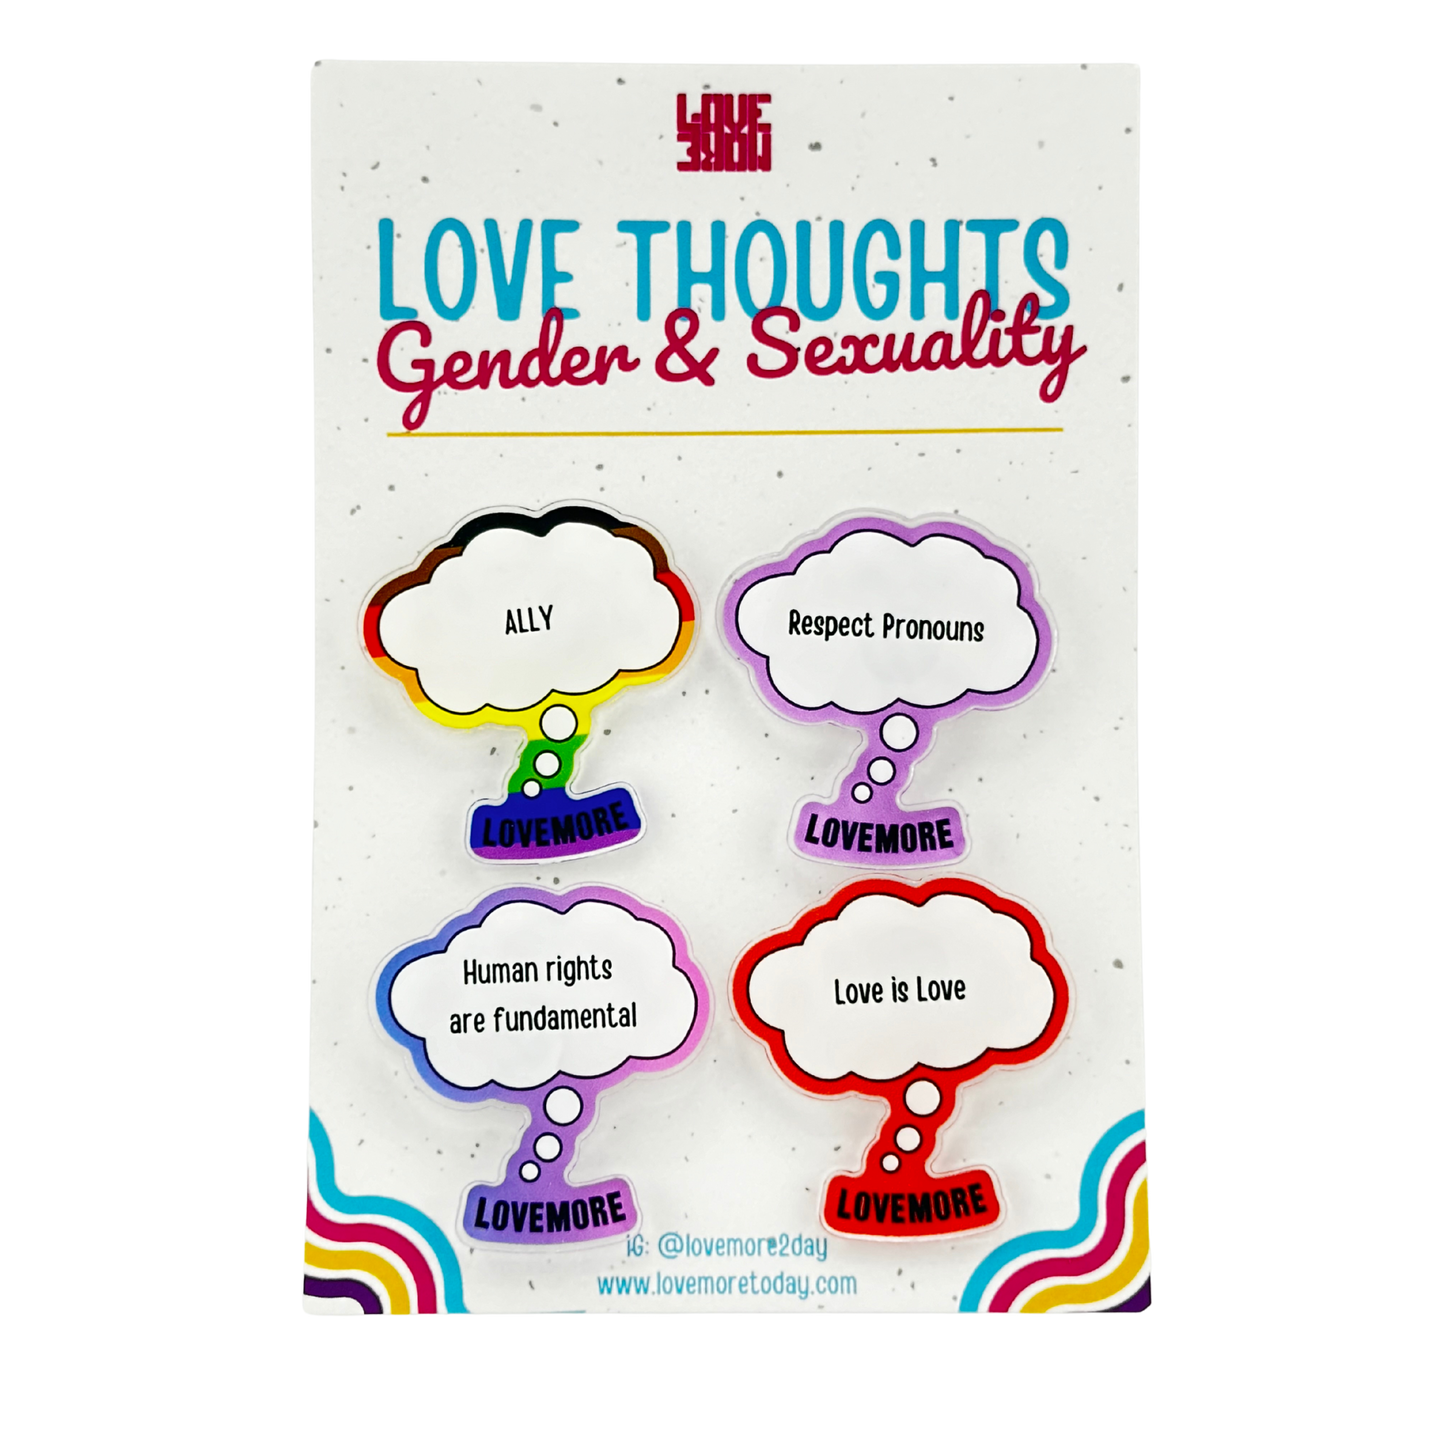 PIN BADGES: LOVE THOUGHTS Gender & Sexuality 4-Pack Bundle